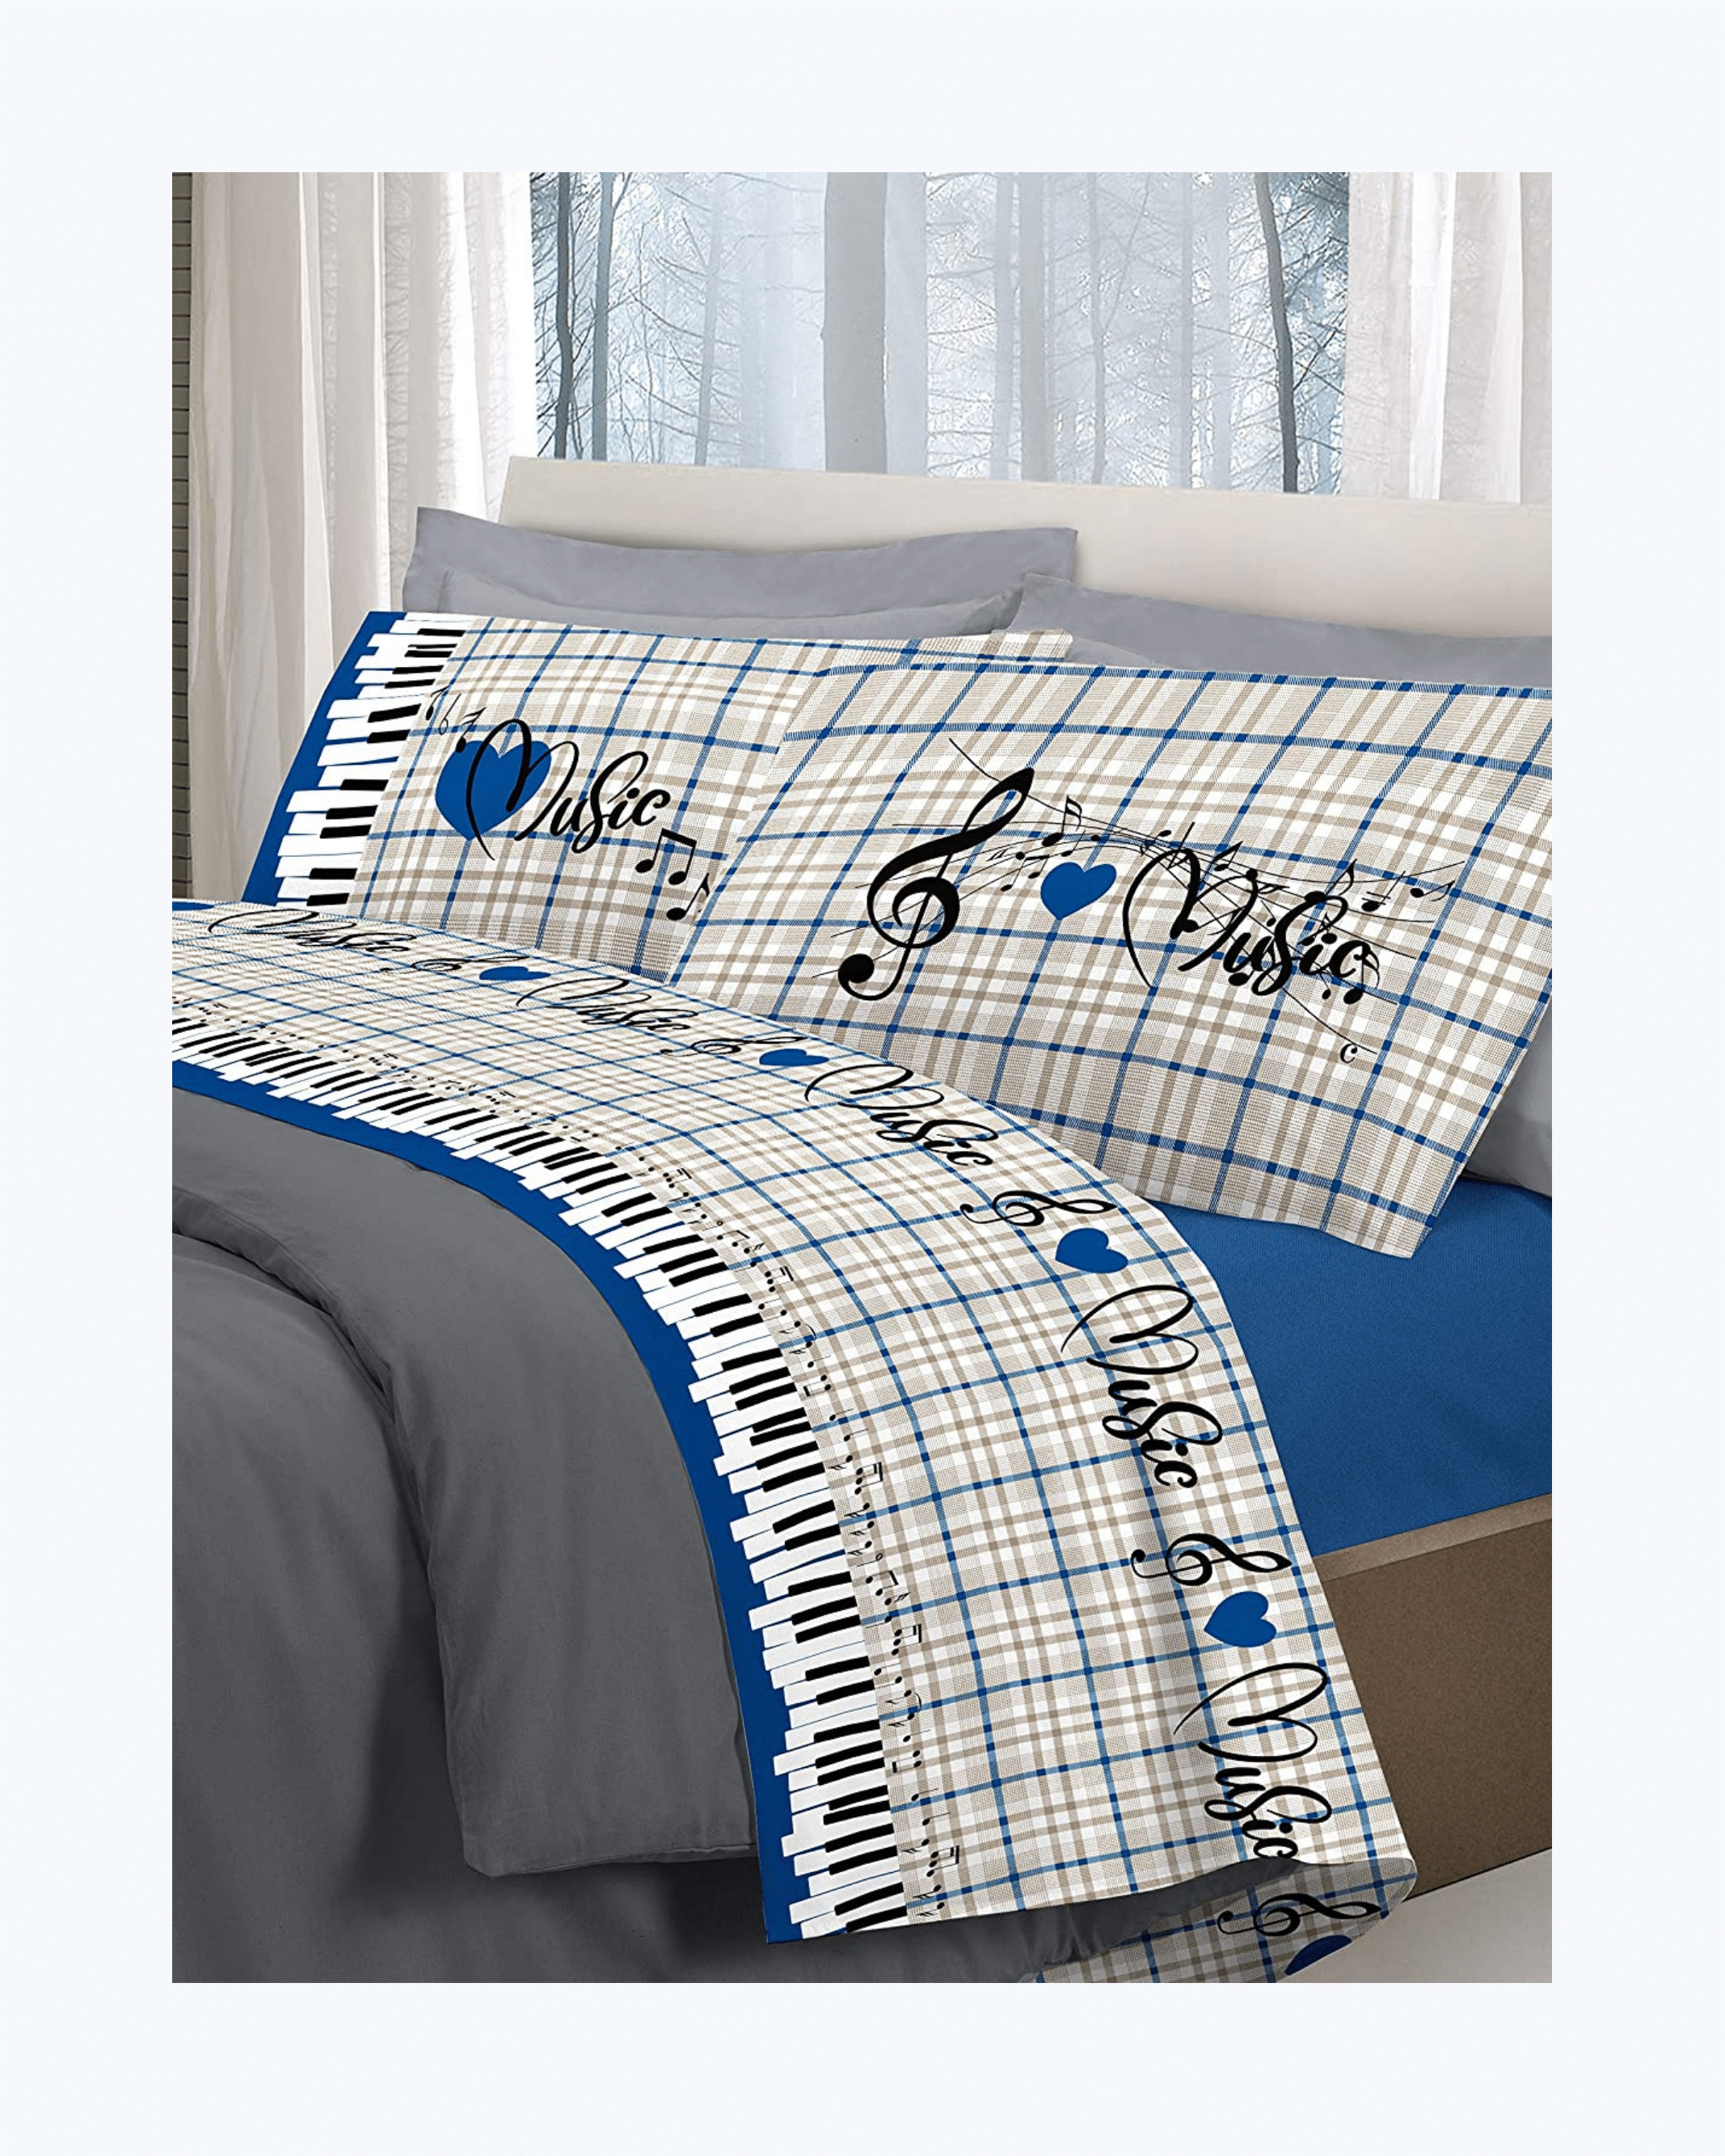 Set Lenzuola Letto in Cotone Made in Italy - Completo Letto Stampa Note Musicali Blu